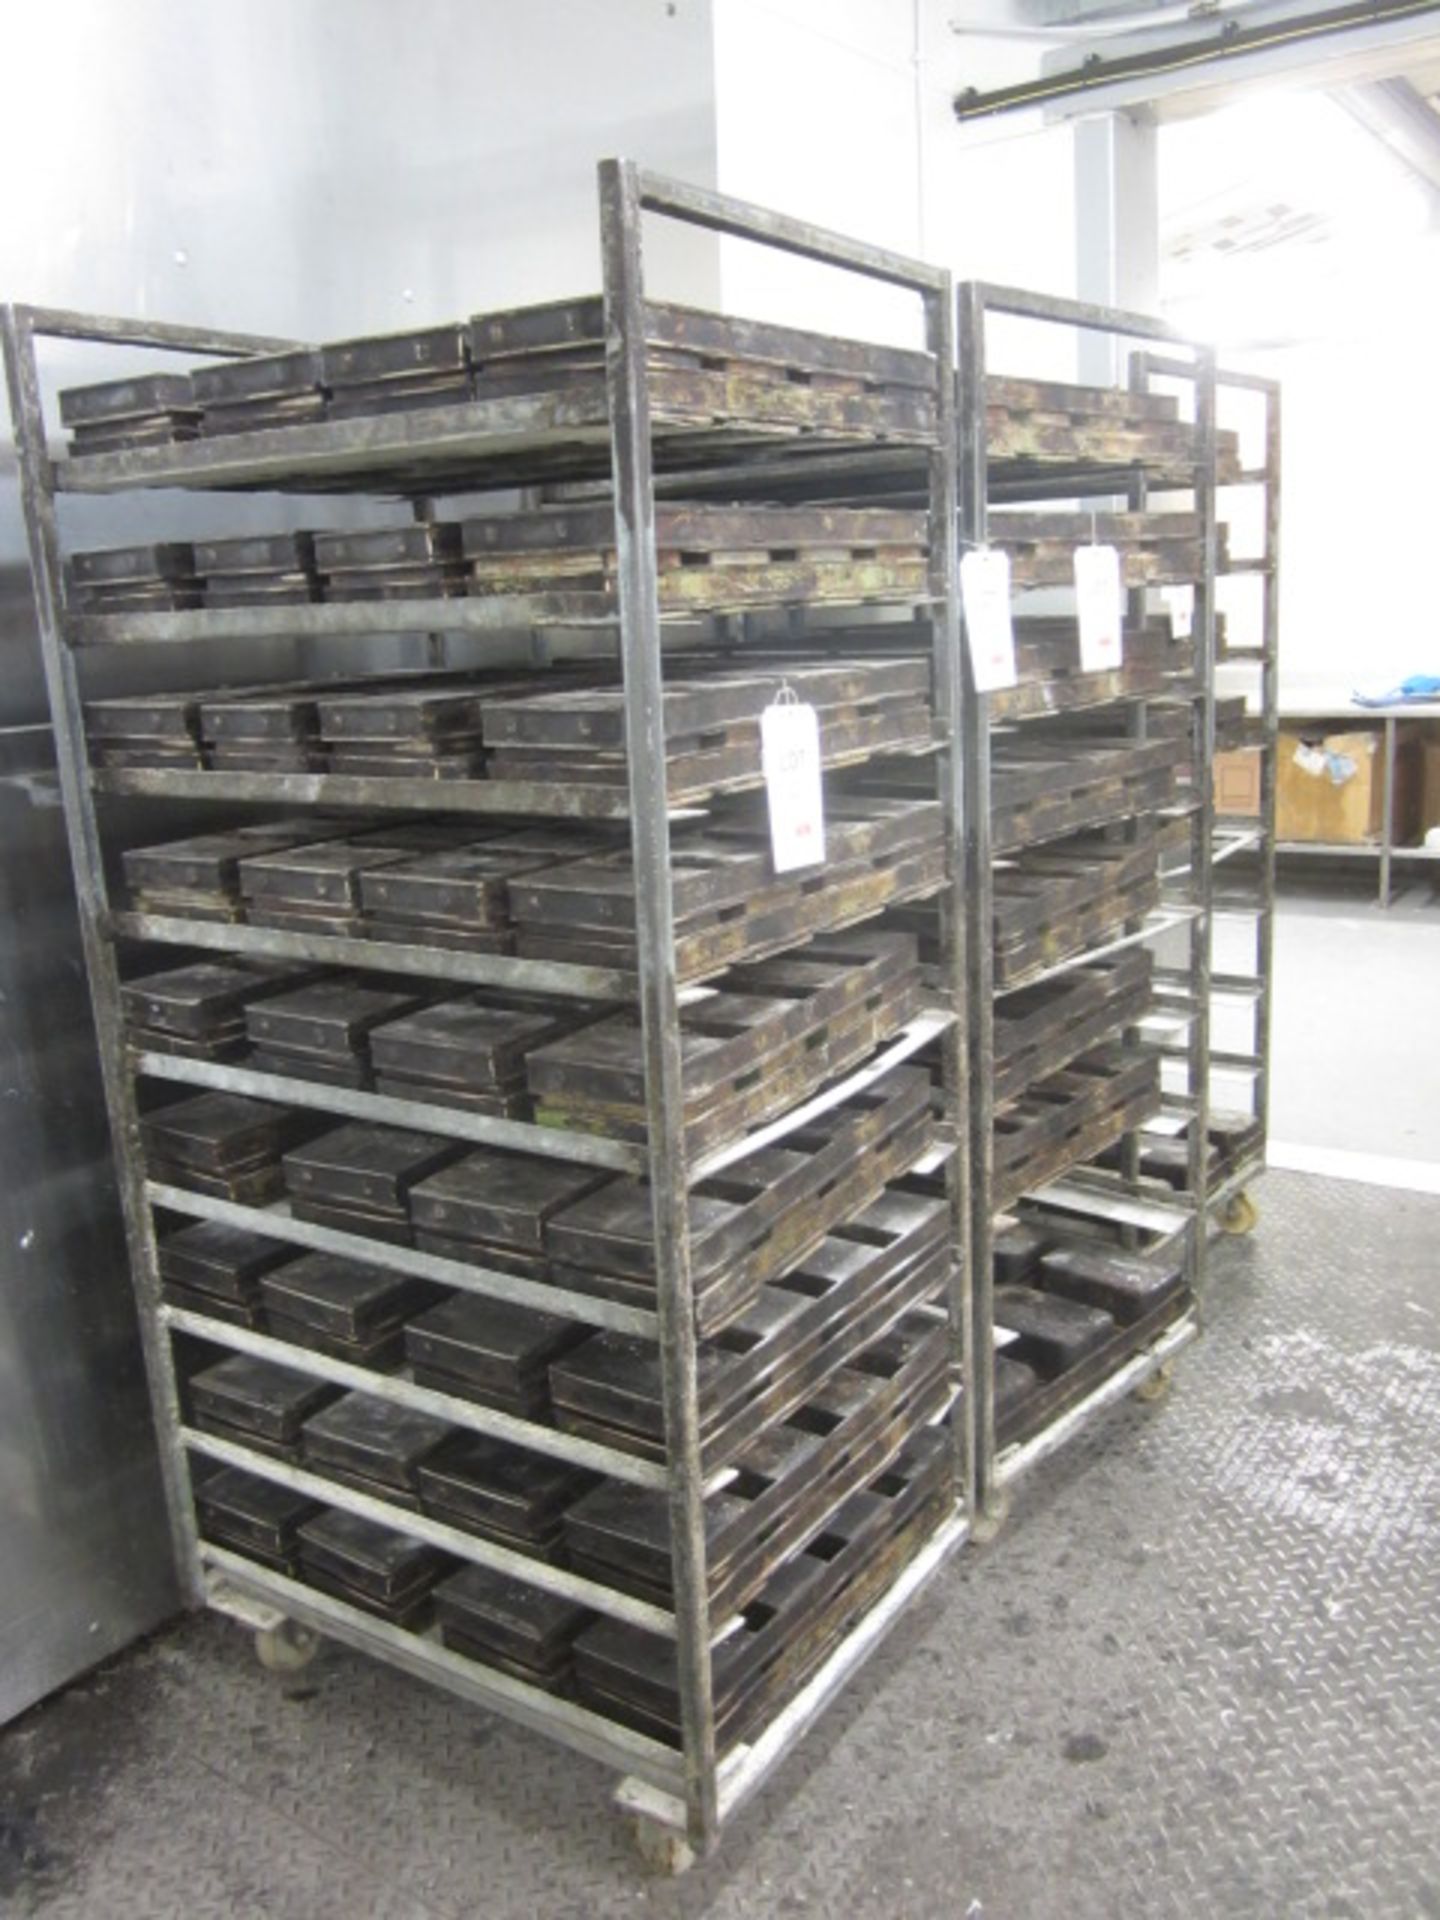 Three Galvanised steel 9-shelf mobile bakers tray racks (excluding contents) - Image 2 of 2